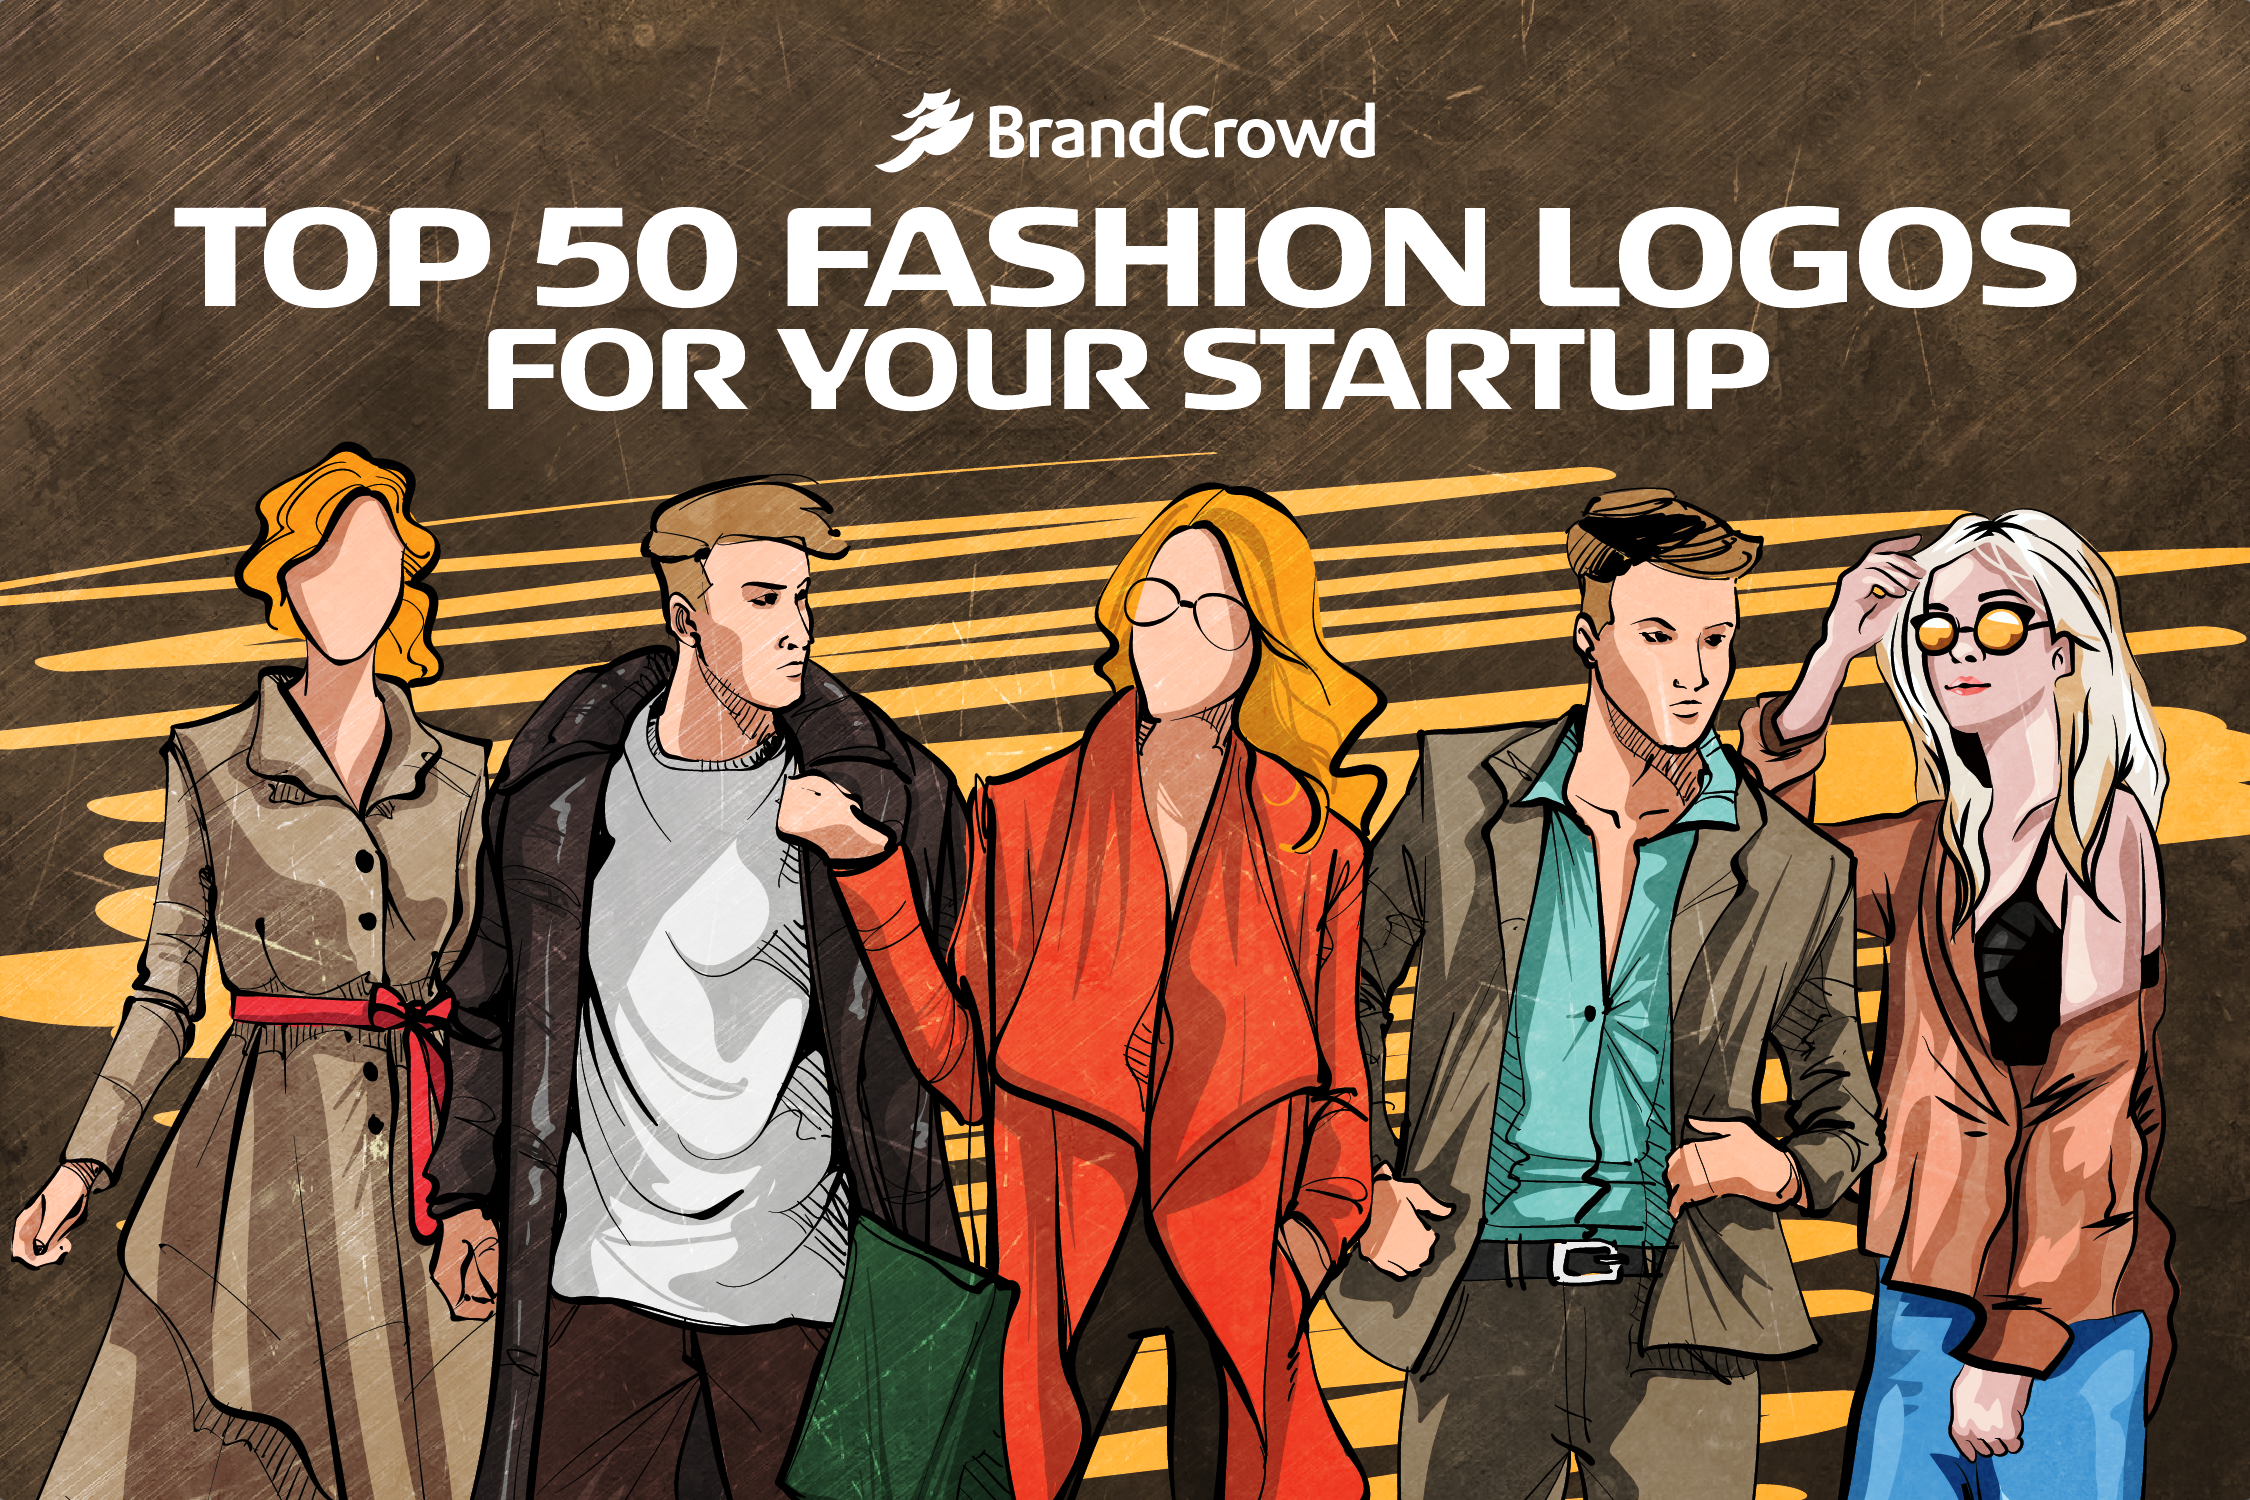 50 Social Media Content Ideas // Fashion Brand, Clothing Business